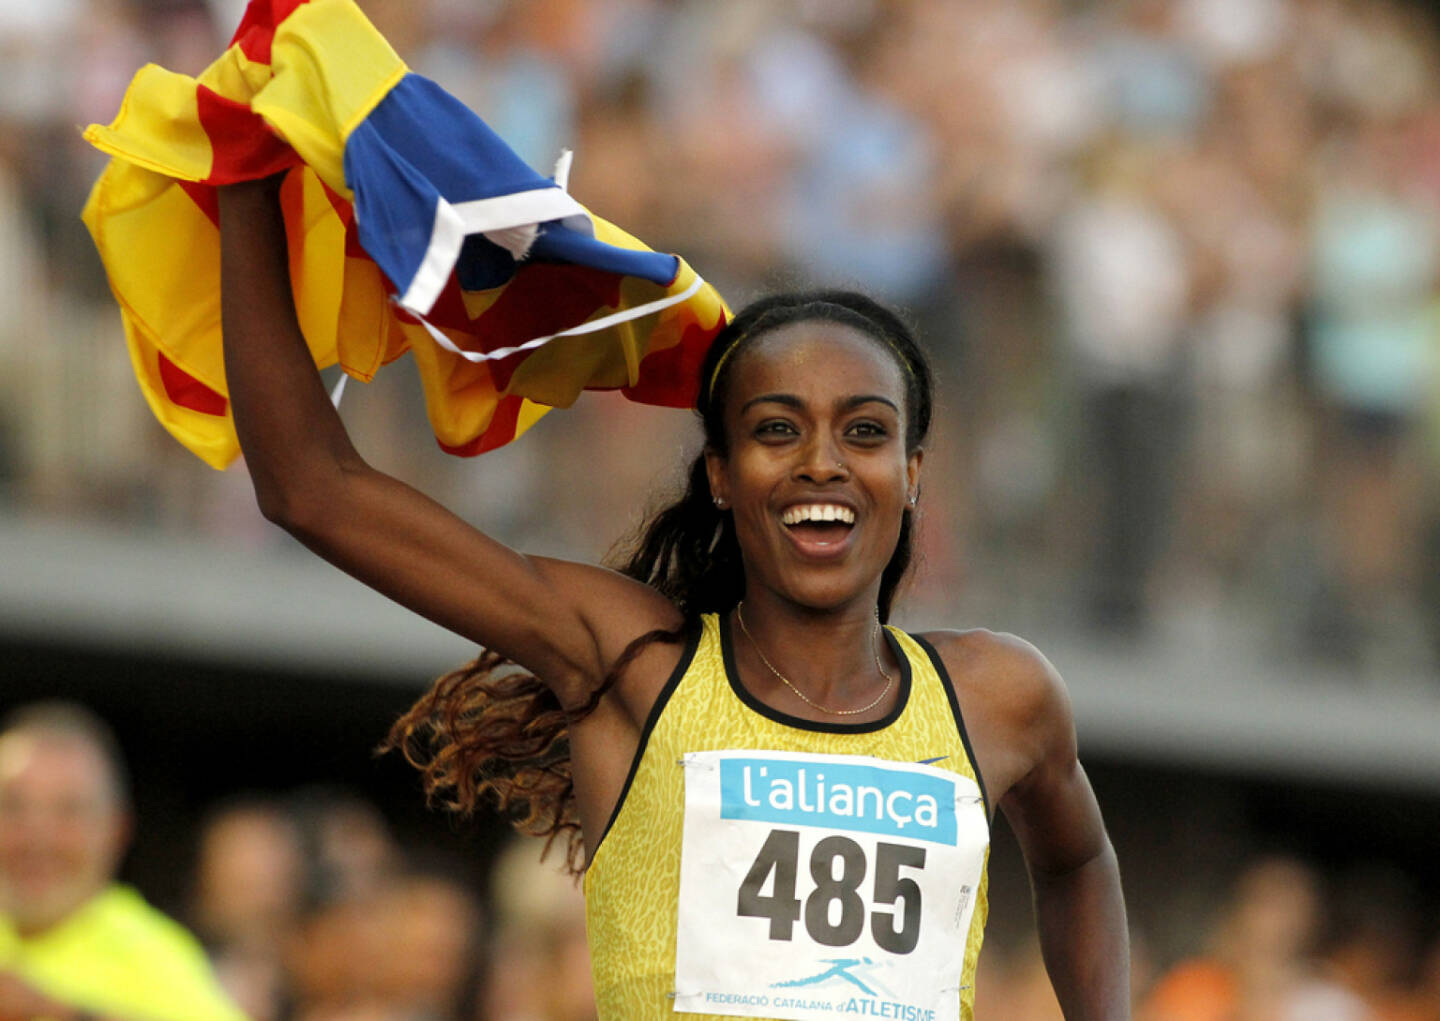 Yes Genzebe Dibaba,<a href=http://www.shutterstock.com/gallery-224068p1.html?cr=00&pl=edit-00>Maxisport</a> / <a href=http://www.shutterstock.com/editorial?cr=00&pl=edit-00>Shutterstock.com</a>, Maxisport / Shutterstock.com